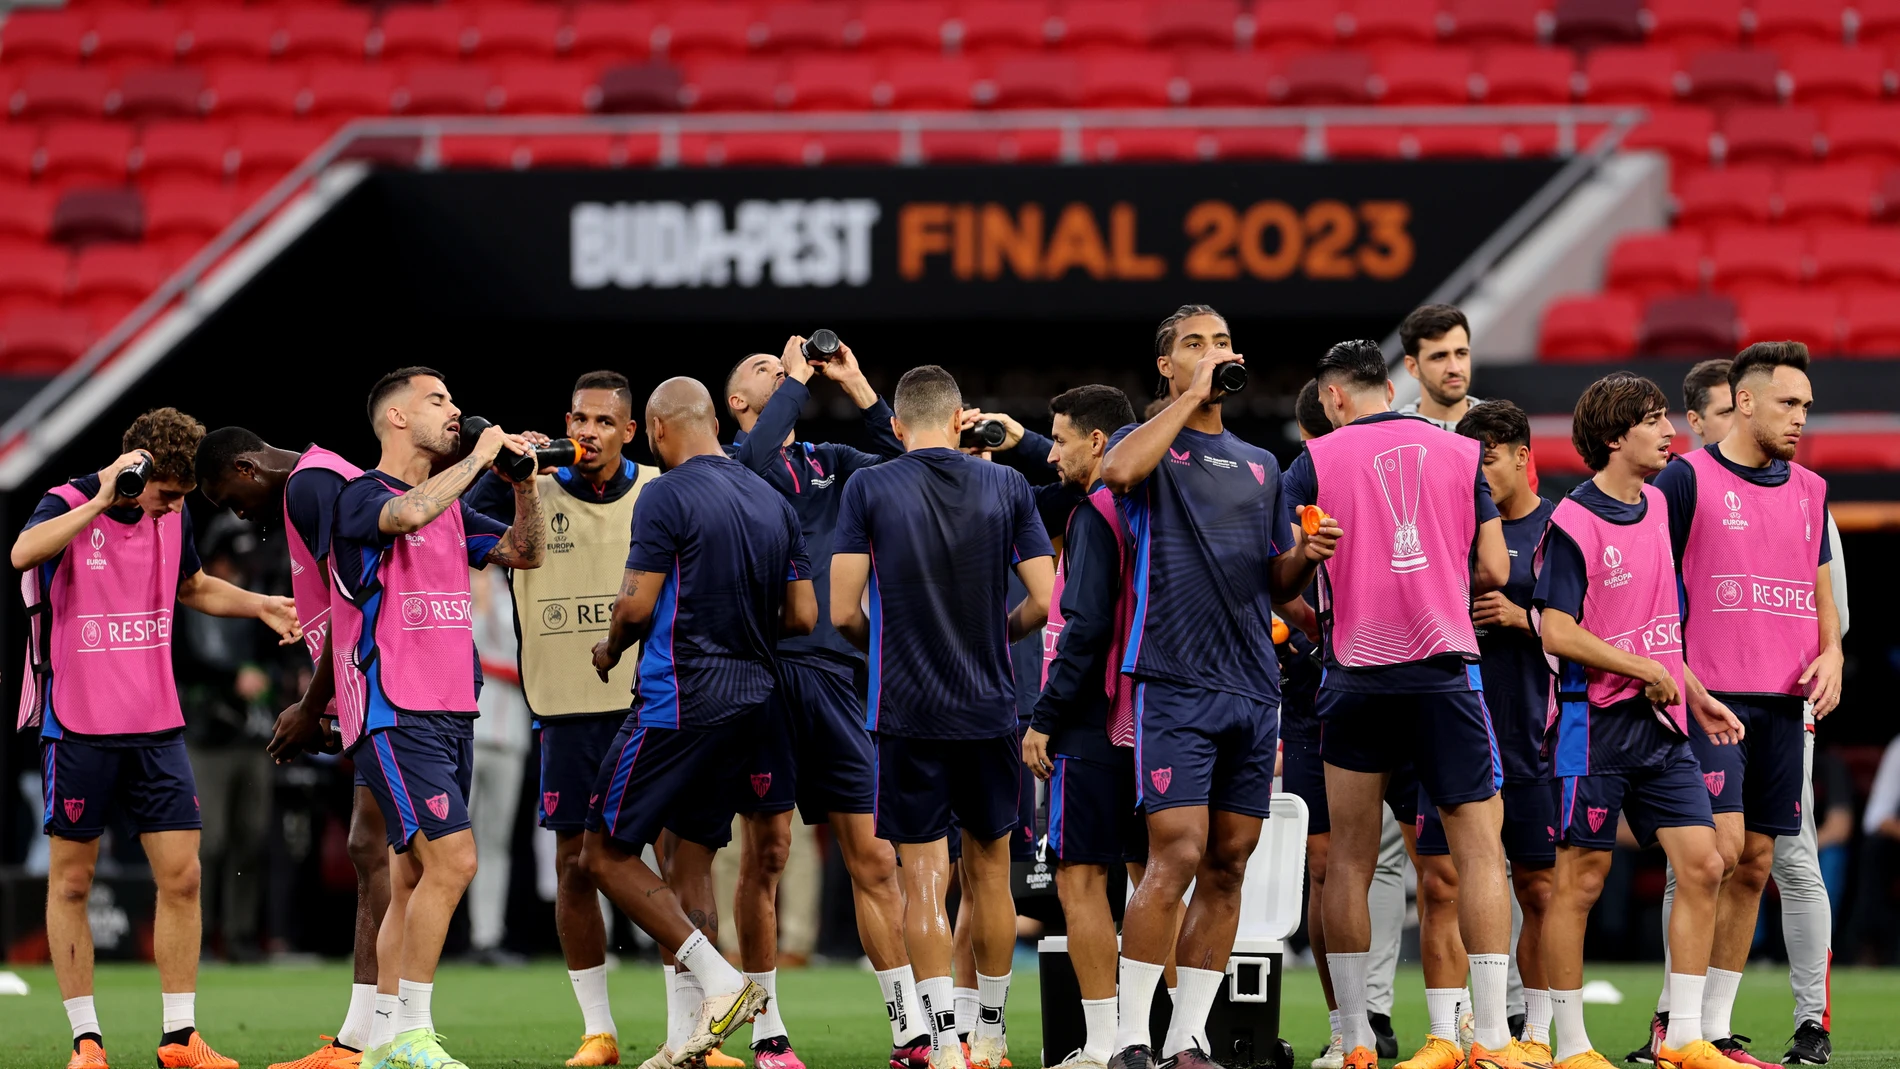 Budapest (Hungary), 30/05/2023.- Players of Sevilla refresh during a training session in Budapest, Hungary, 30 May 2023. AS Roma will face Sevilla FC in the UEFA Europa League final in Budapest on 31 May 2023. (Hungría) EFE/EPA/ANNA SZILAGYI 